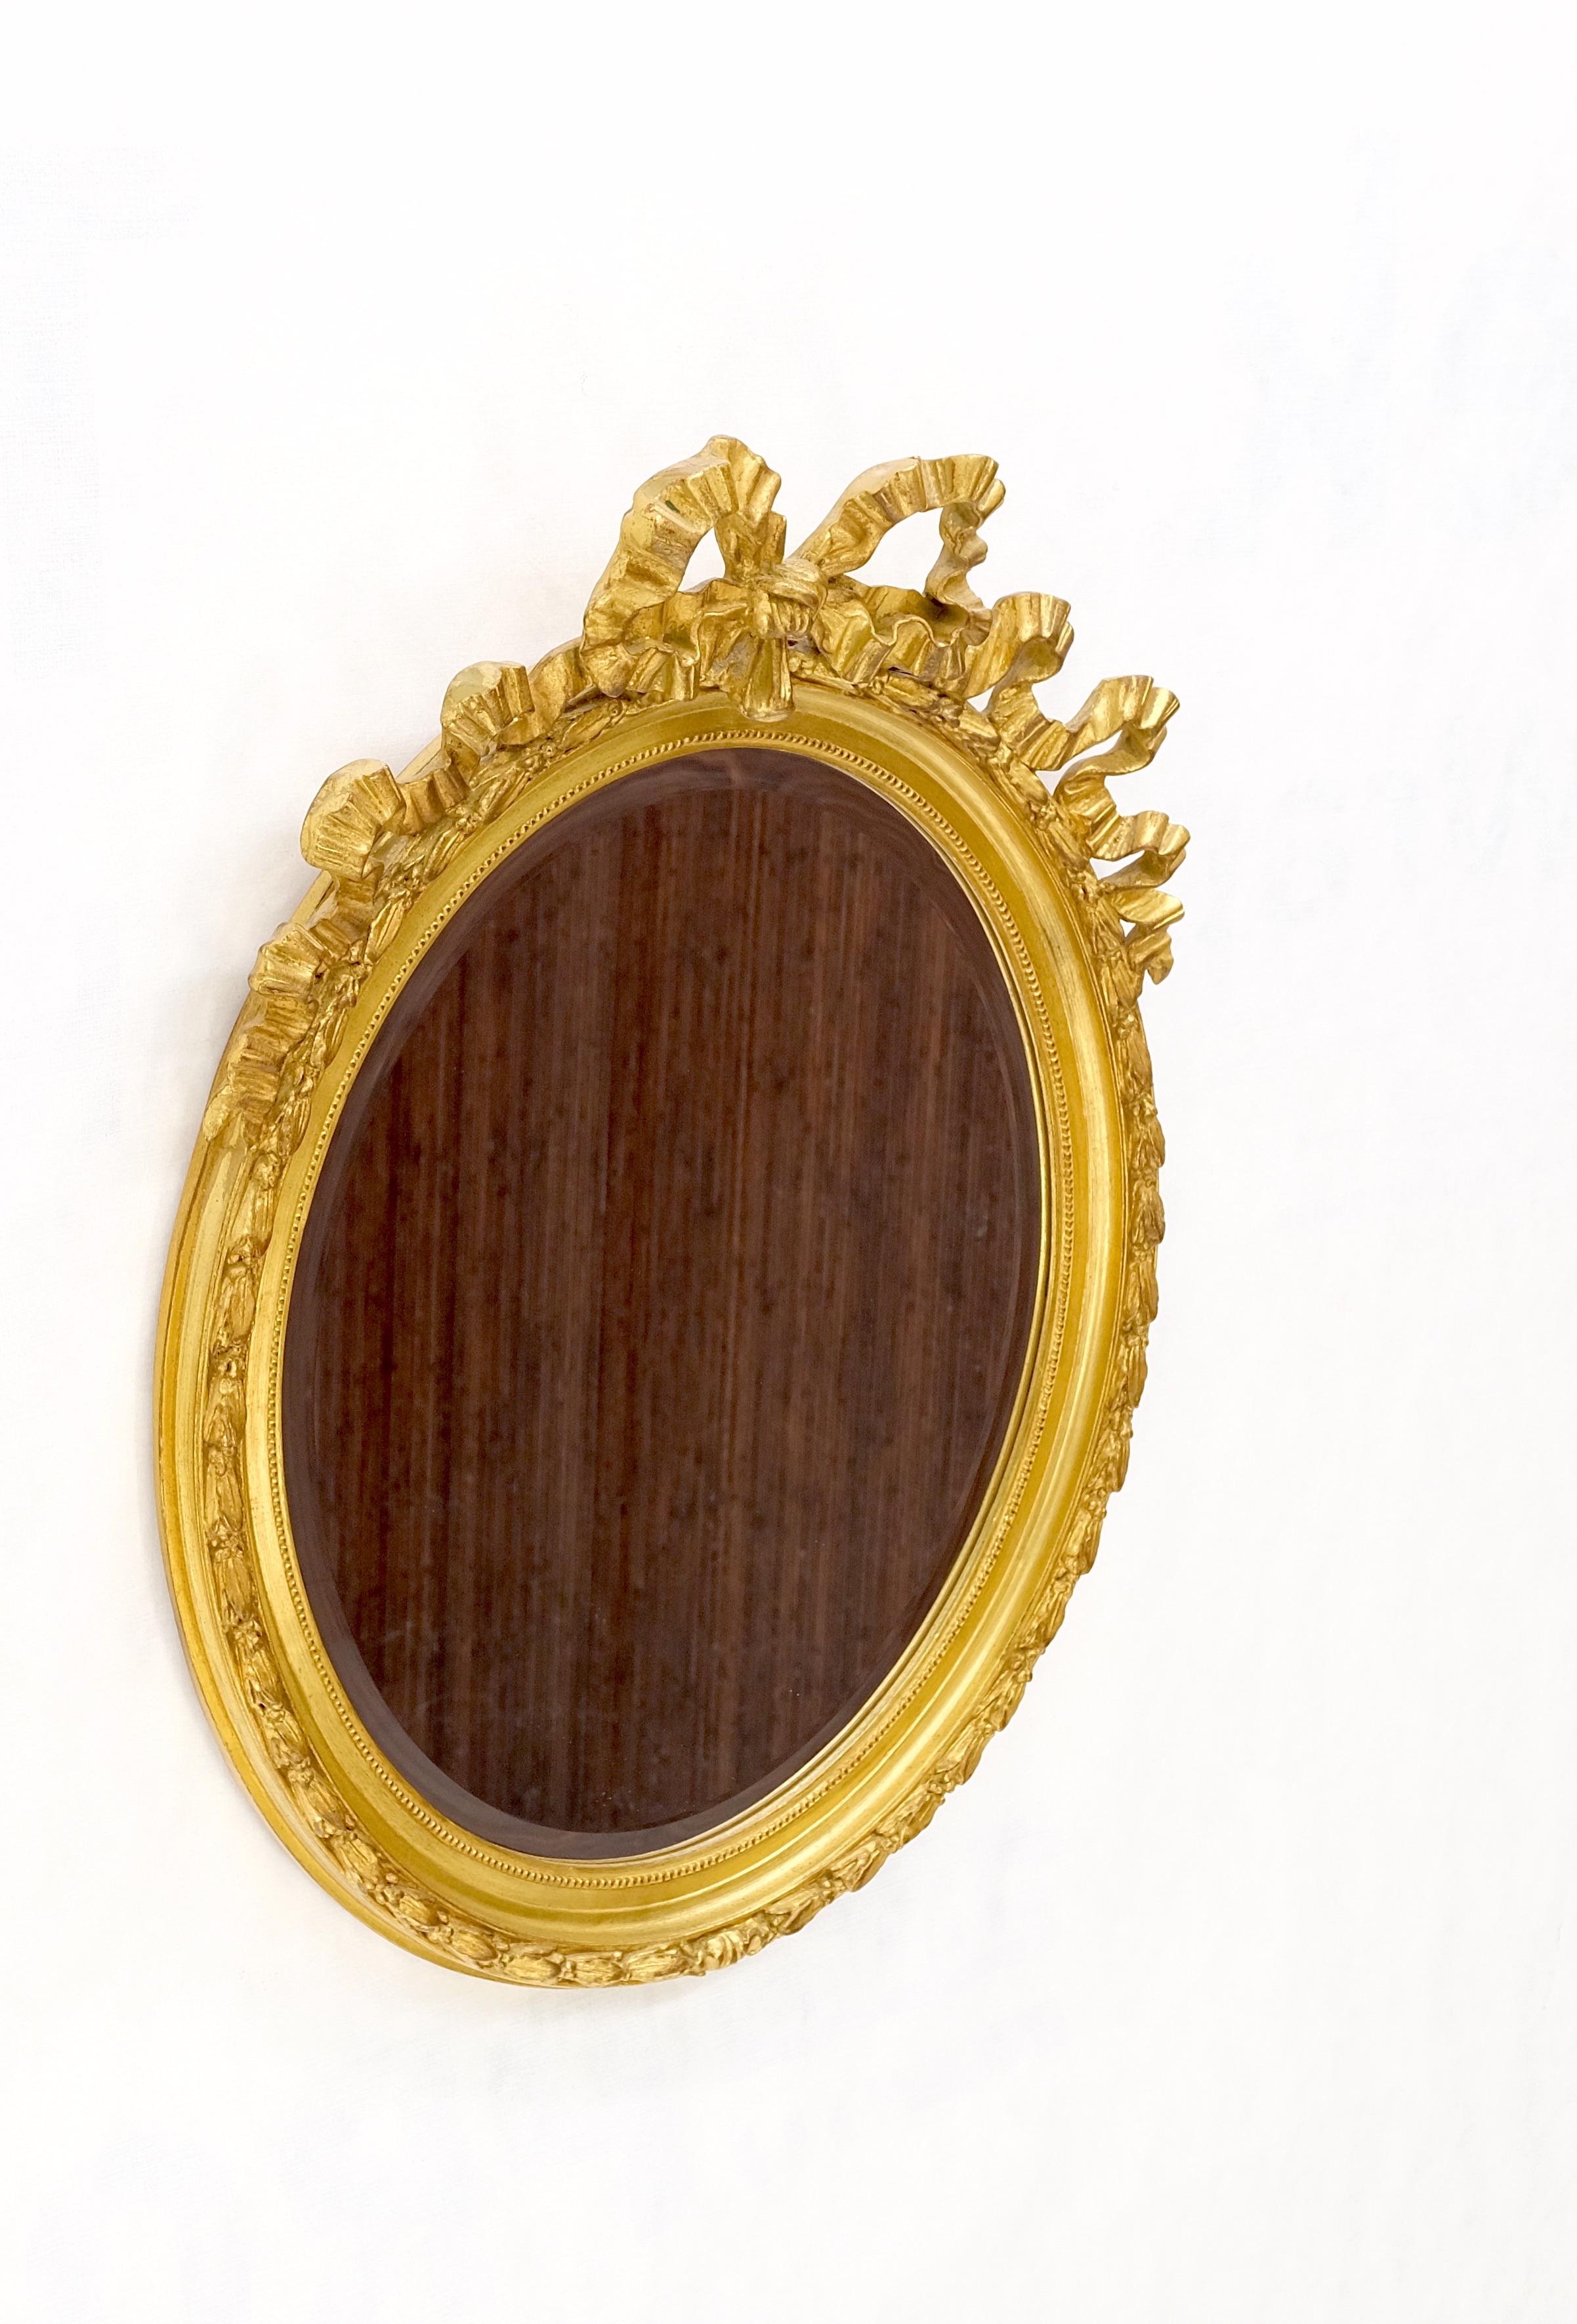 Oval Gilt Ribbon Spikelet of Wheat Pattern Carved Wood Wall Mirror MINT! In Good Condition For Sale In Rockaway, NJ